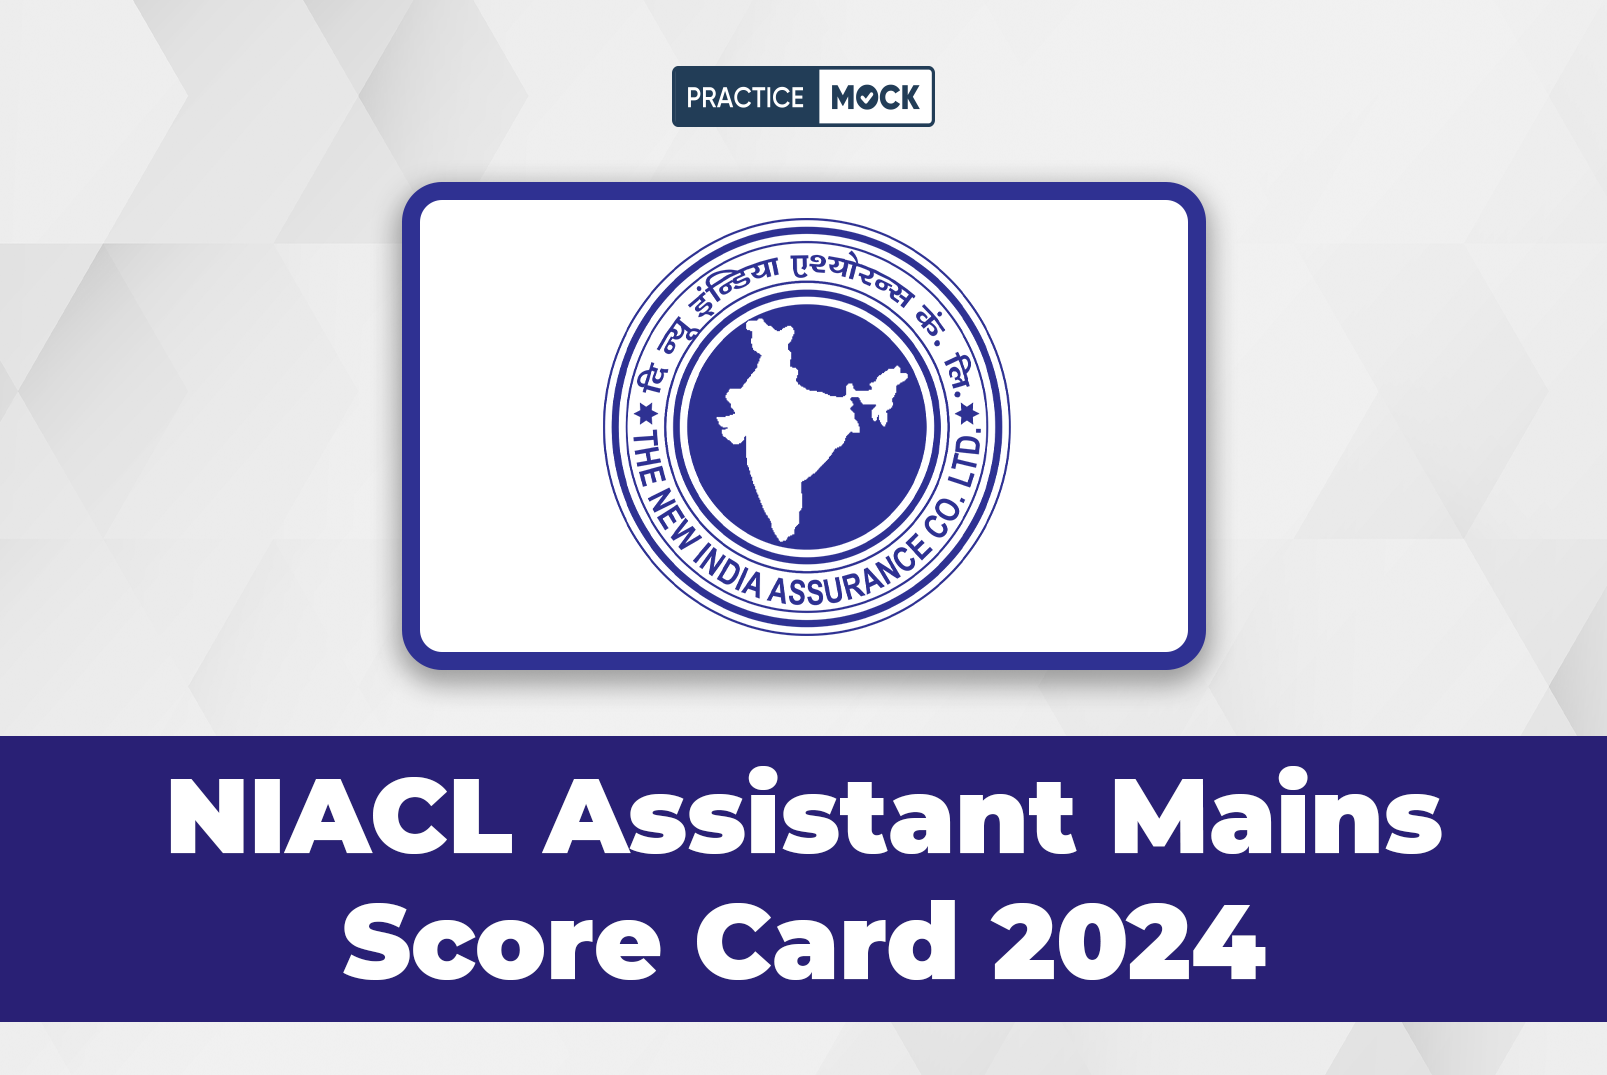 NIACL Assistant Mains Score Card 2024, Scorecard and Marks